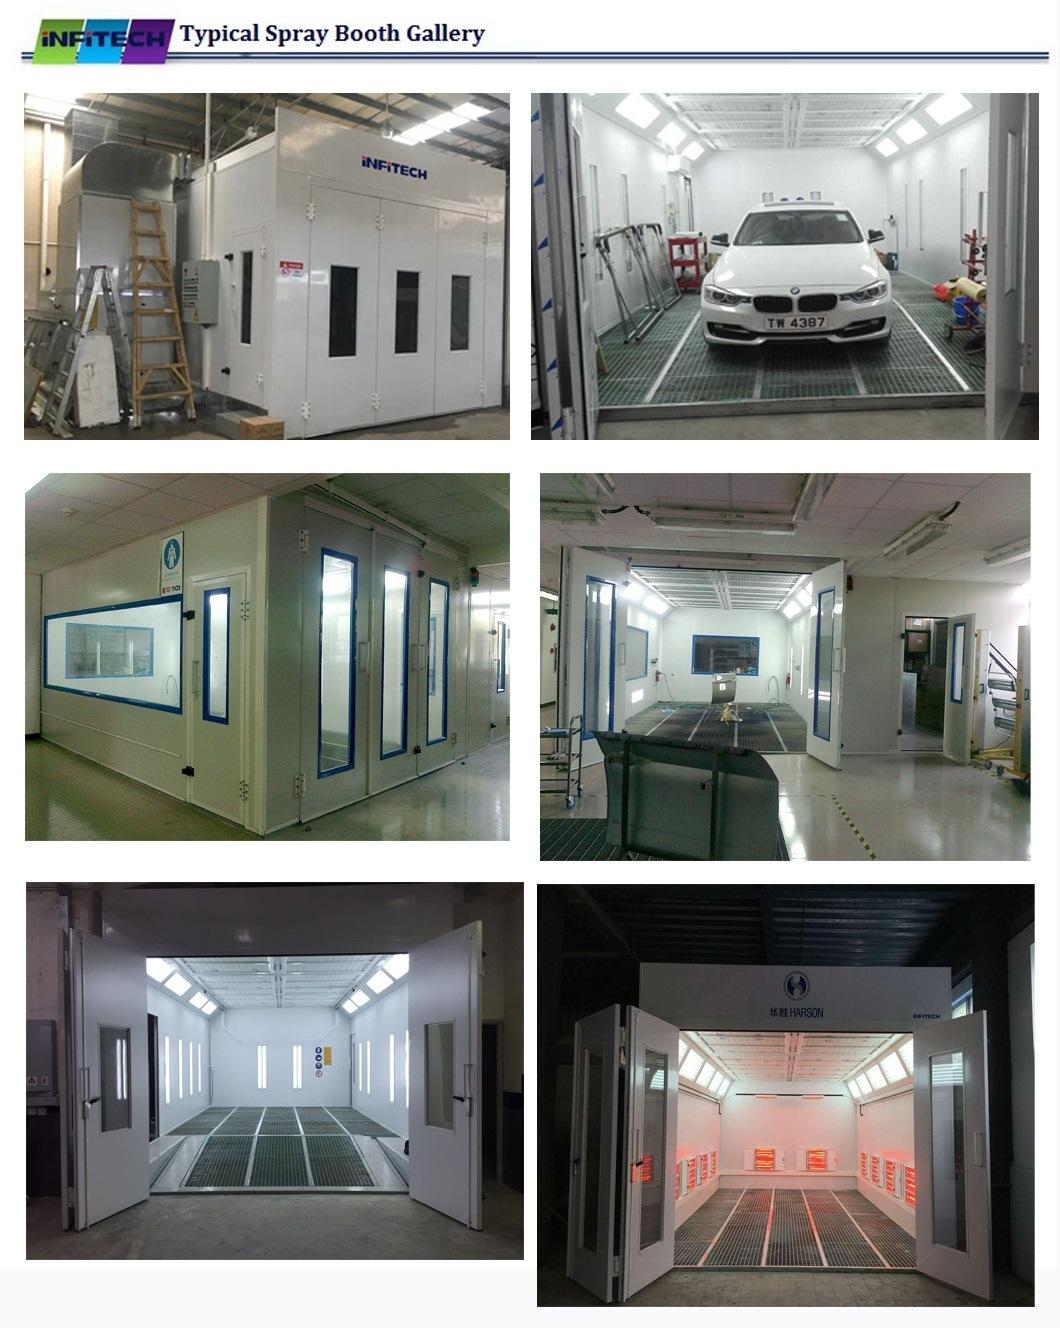 Paint Booth/Spray Booths/Paint Chamber/Car Painter Cabin for Car Refinish